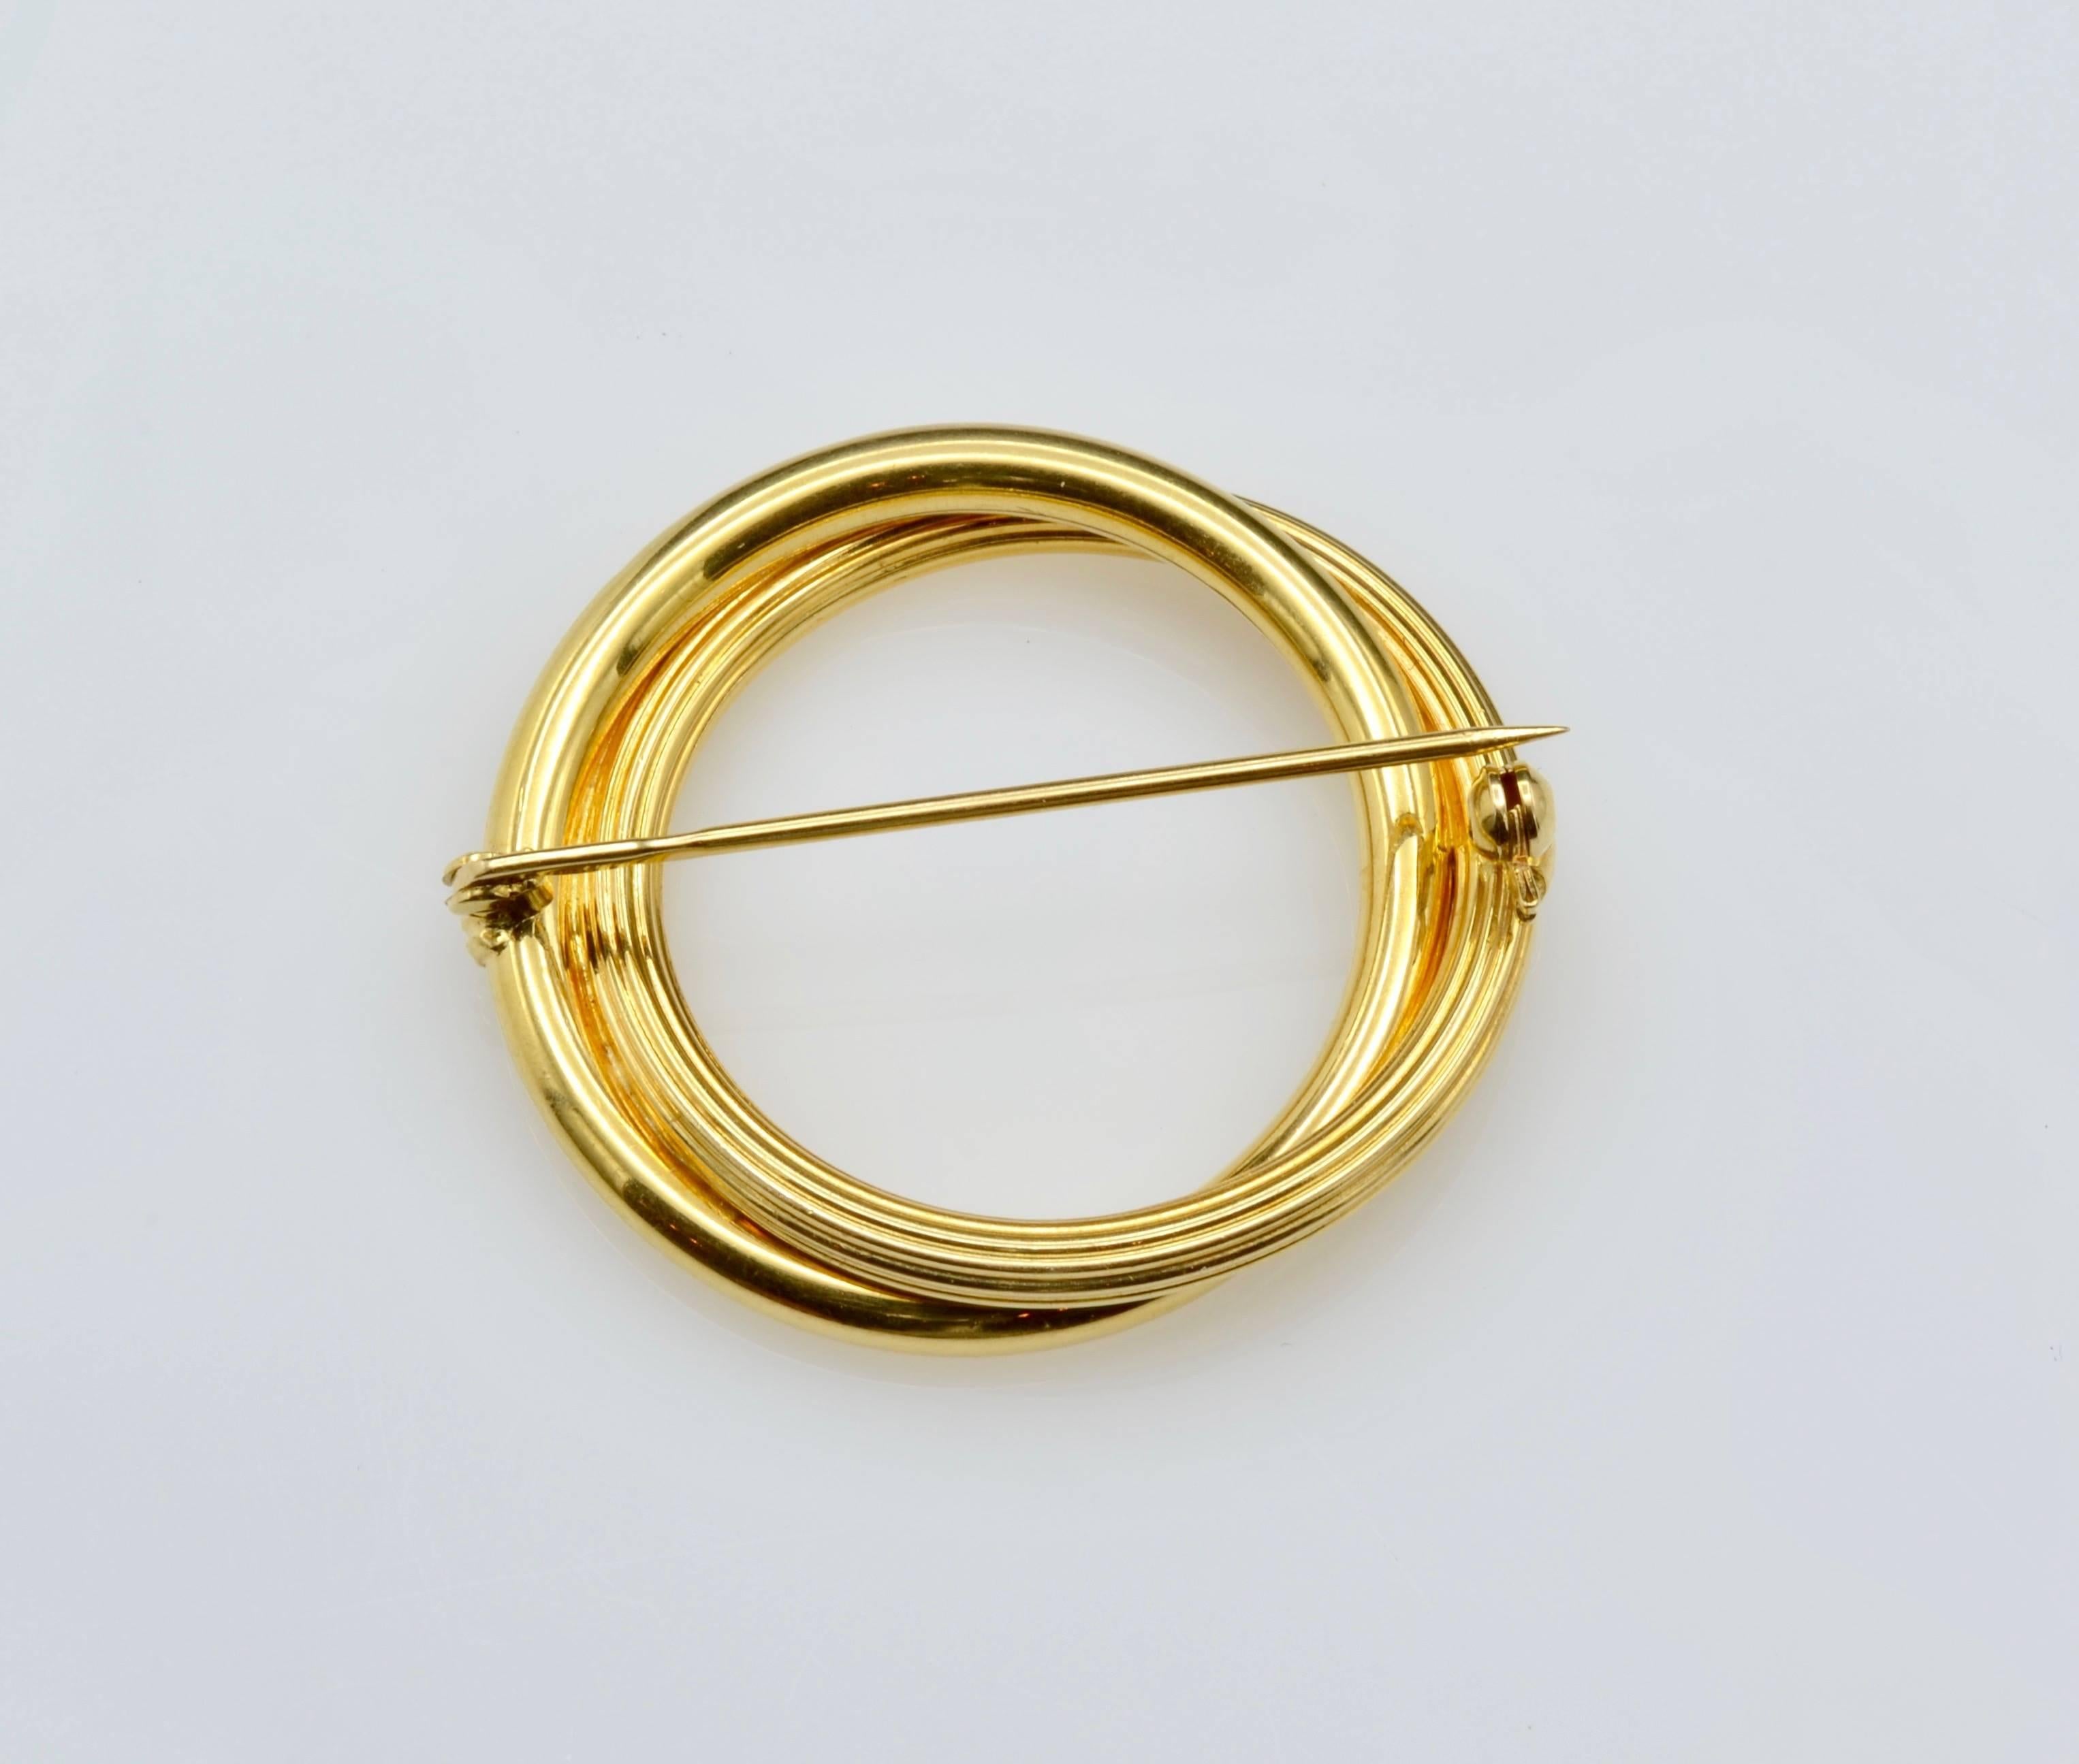 Classic Circle Round 18 Karat Gold Pin In Excellent Condition For Sale In Berkeley, CA